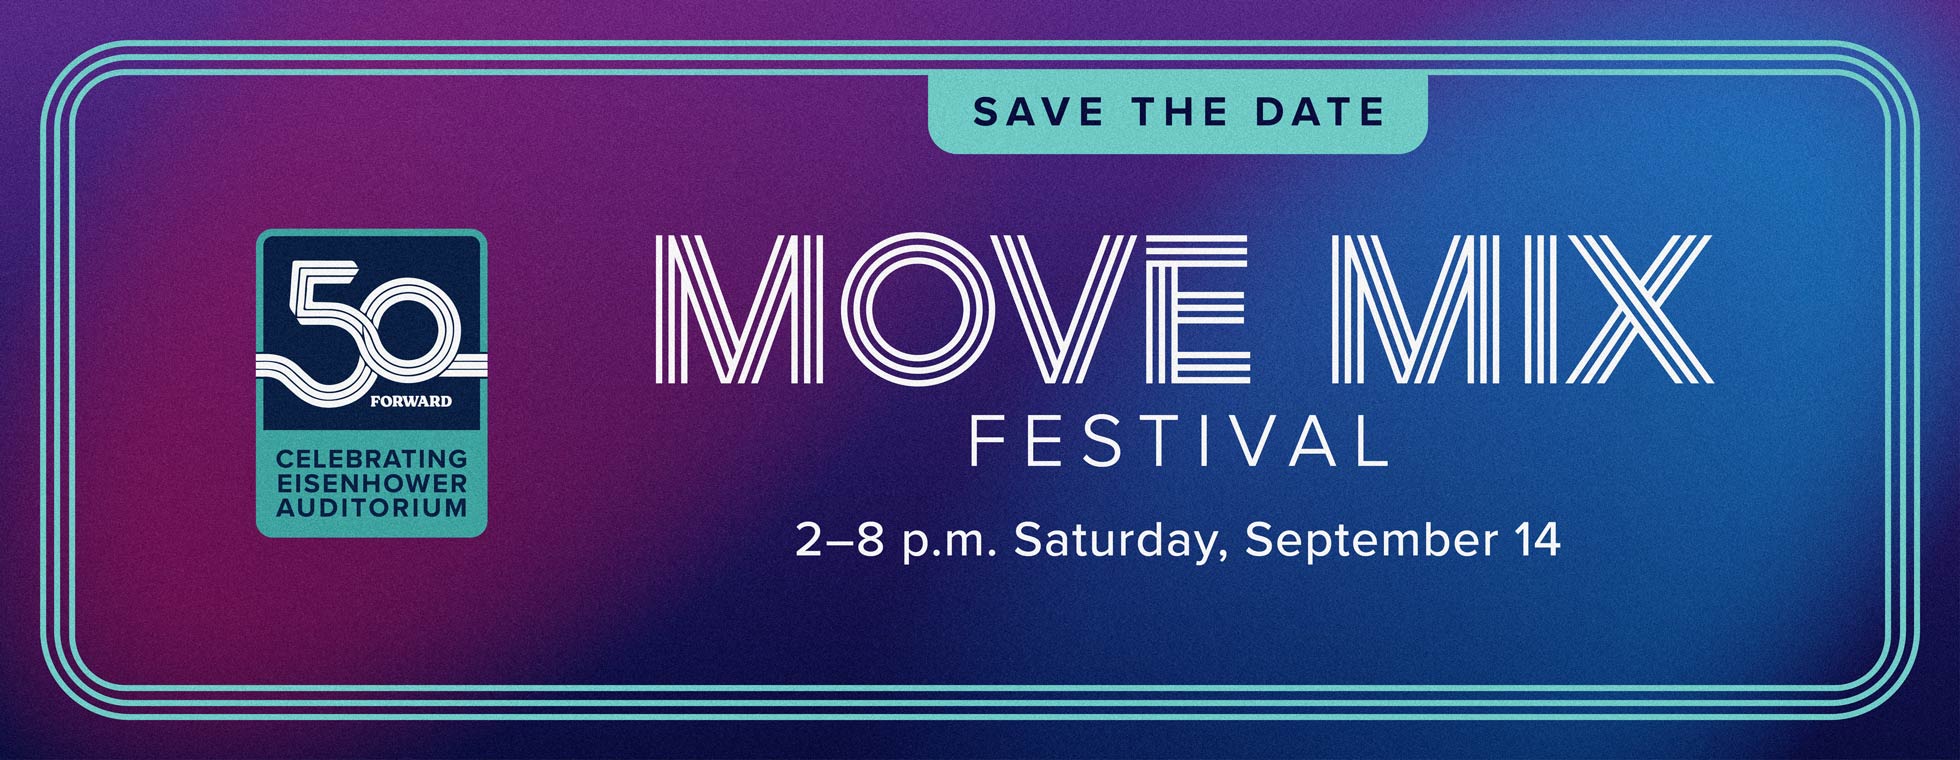 Save the date for the Move Mix Festival. 2–8 p.m. Saturday, September 14. Register now!